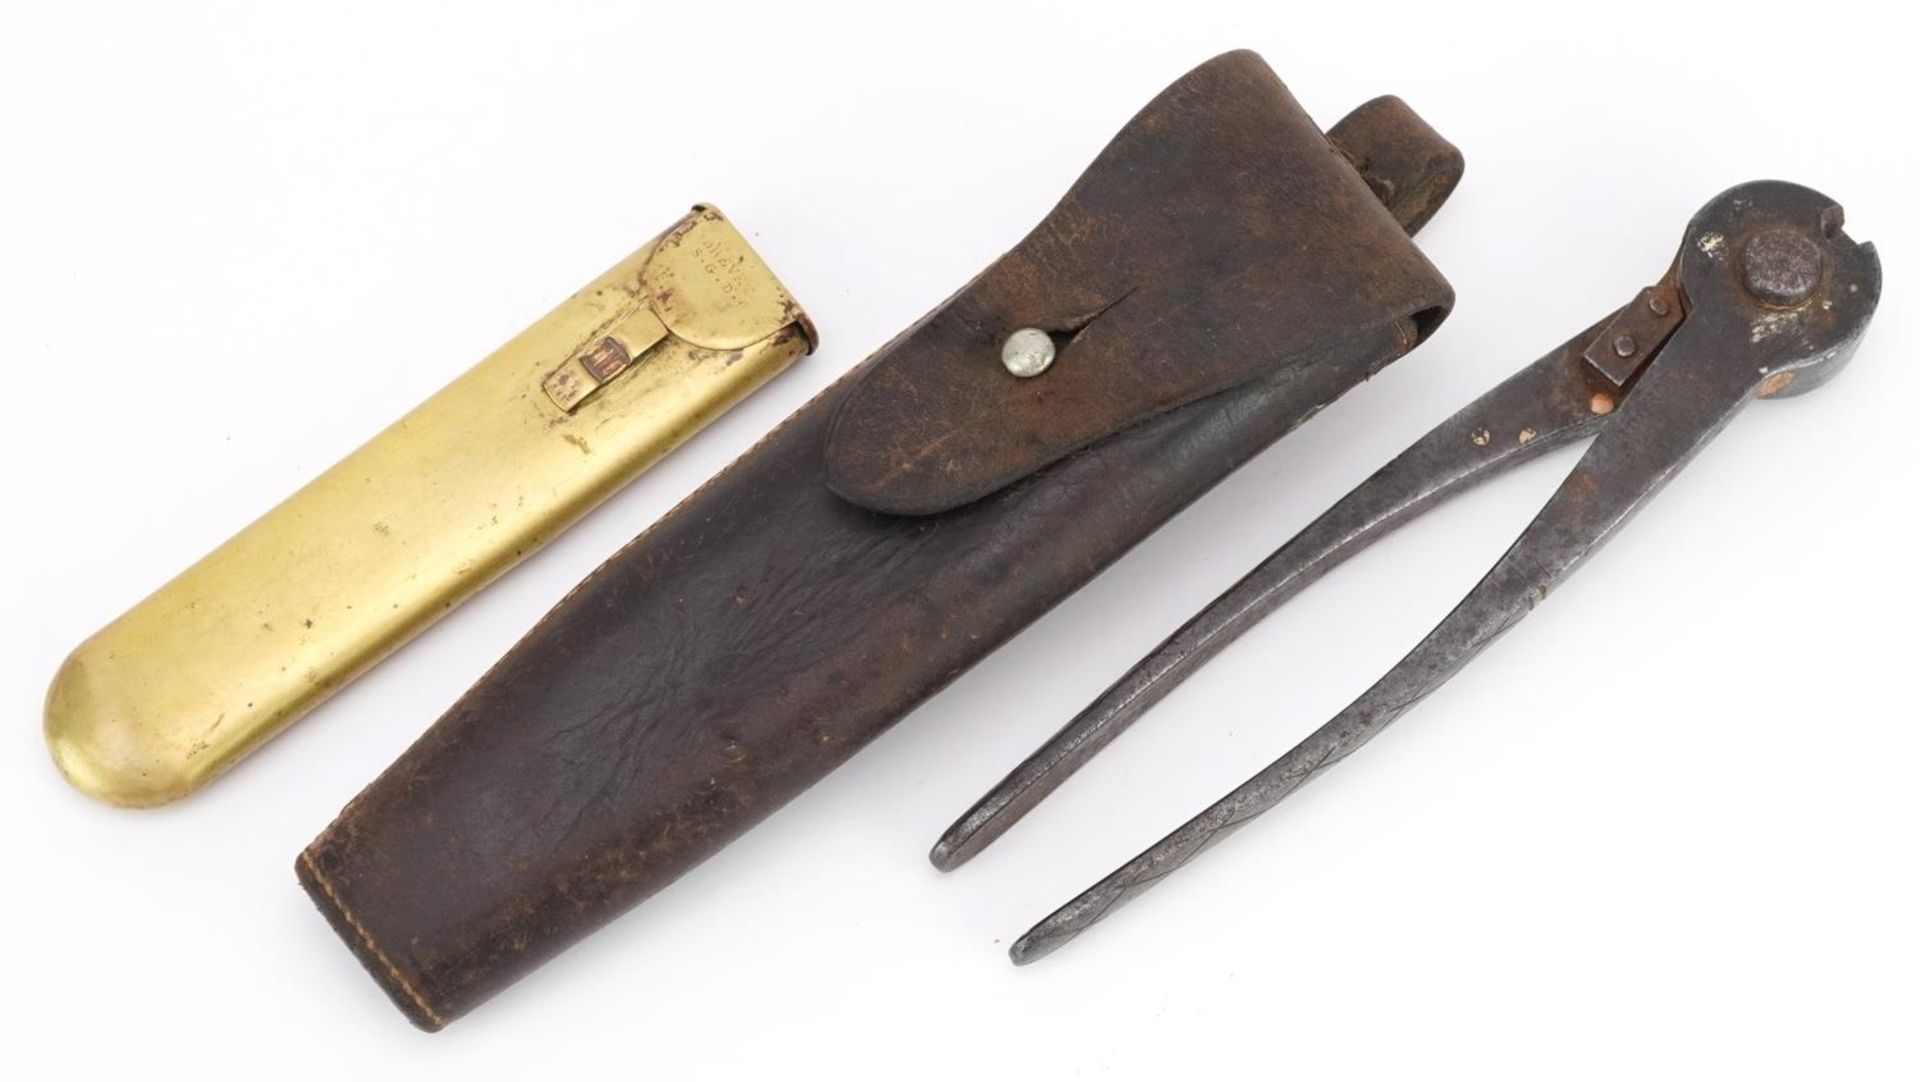 19th century cutters with leather case impressed Whippy Saddler London and glass case impressed